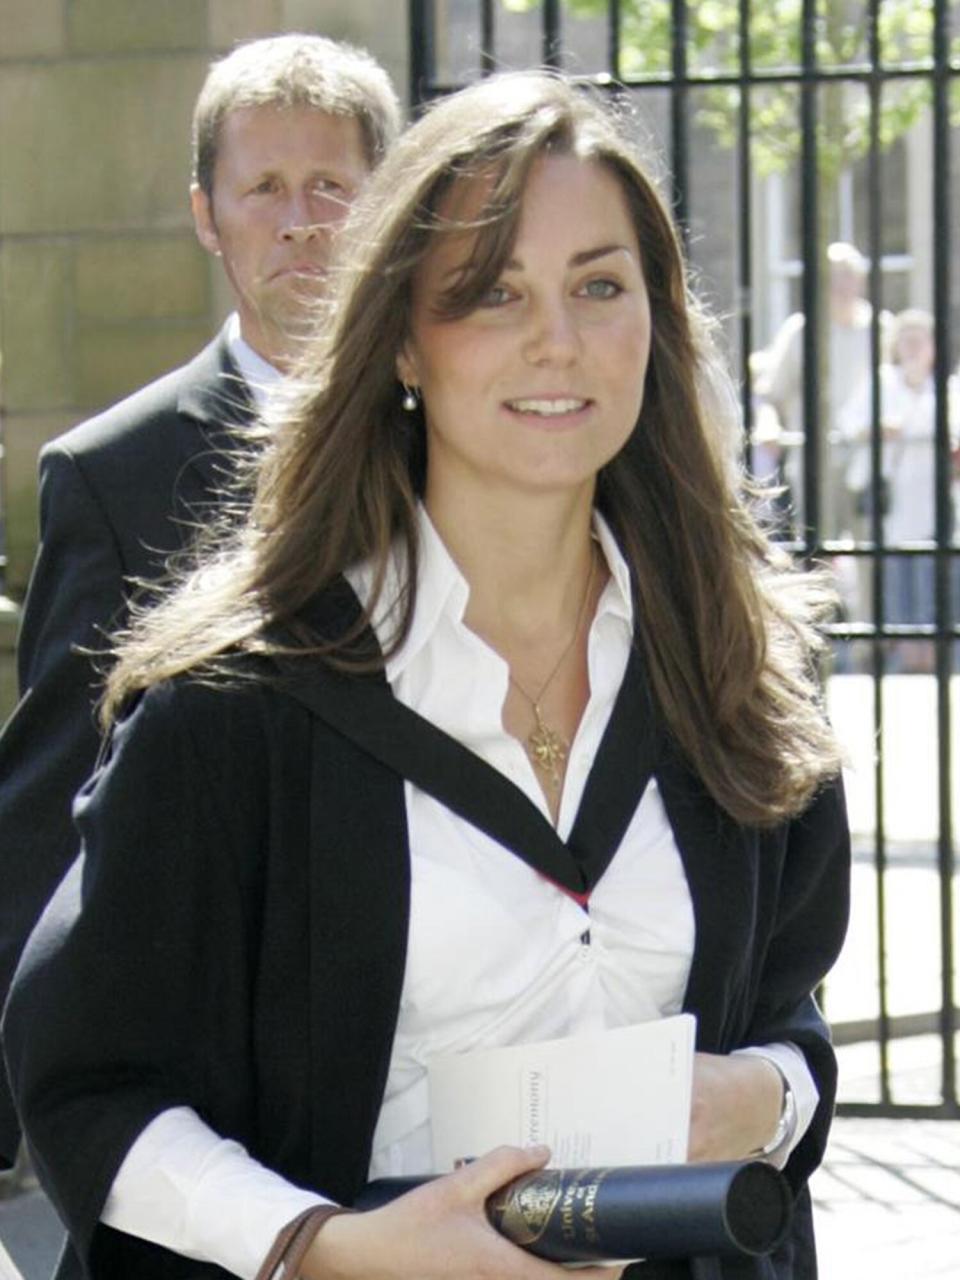 Prince William's girlfriend, Kate Middleton, arrives for his graduation ceremony at the University Of St Andrews on June 15, 2005 in St Andrew's, Scotland. The Prince receives his 2:1 Master Of Arts (Honours) Degree in Geography at Scotland's oldest university, marking the end of his university education